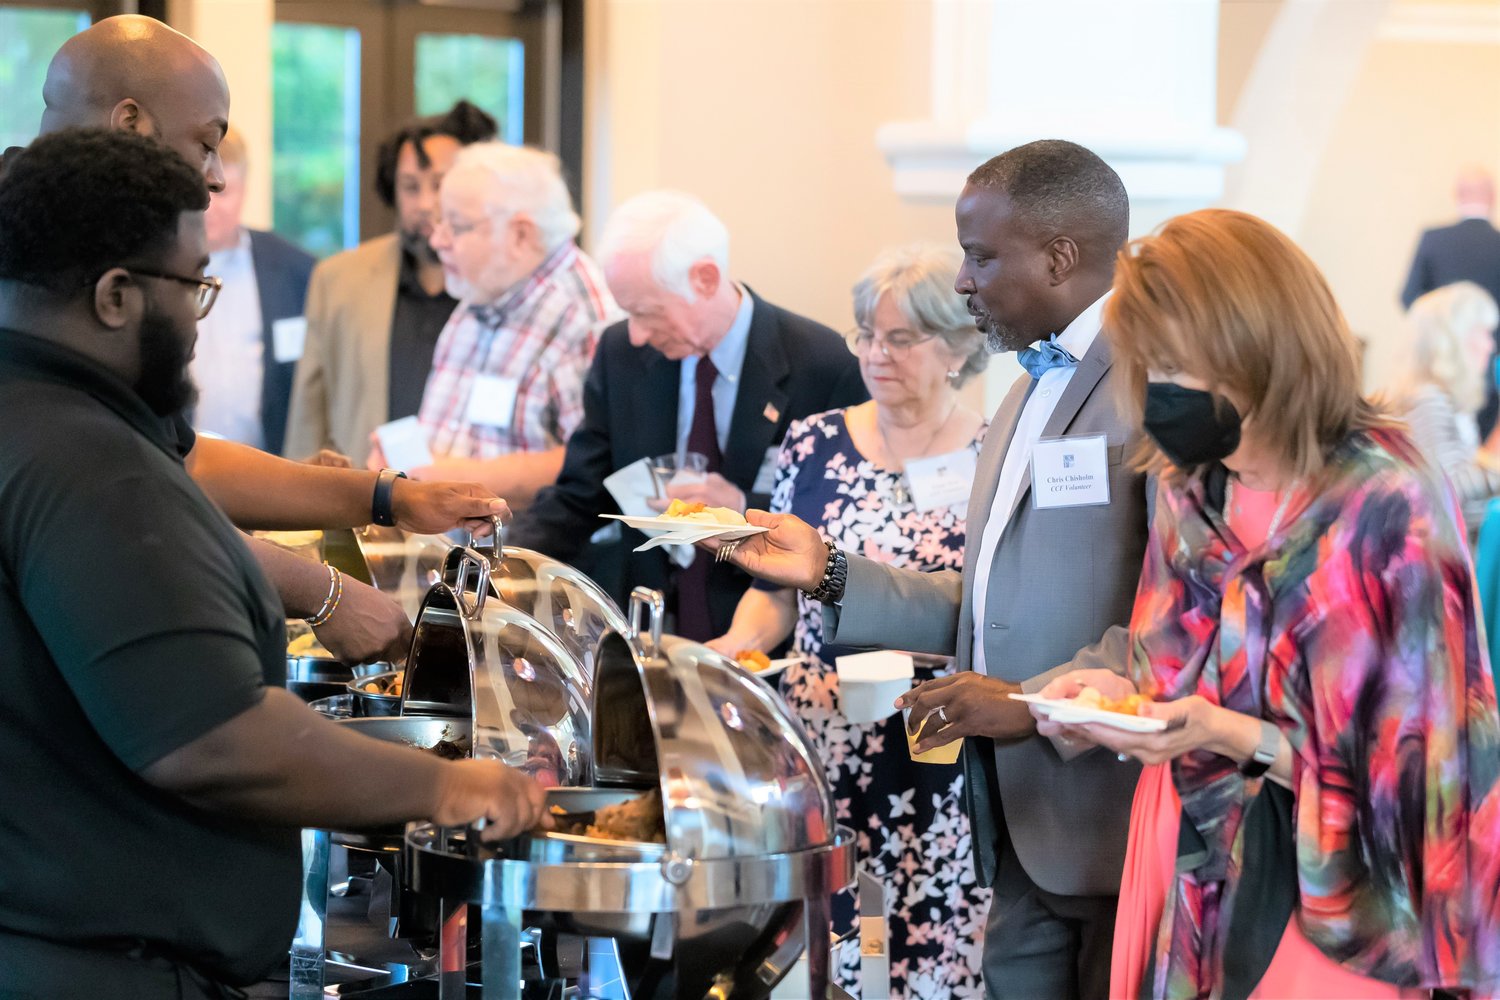 The Cumberland Community Foundation on Thursday evening awarded grants and scholarships totaling $684,060 in a ceremony at Cape Fear Botanical Garden.